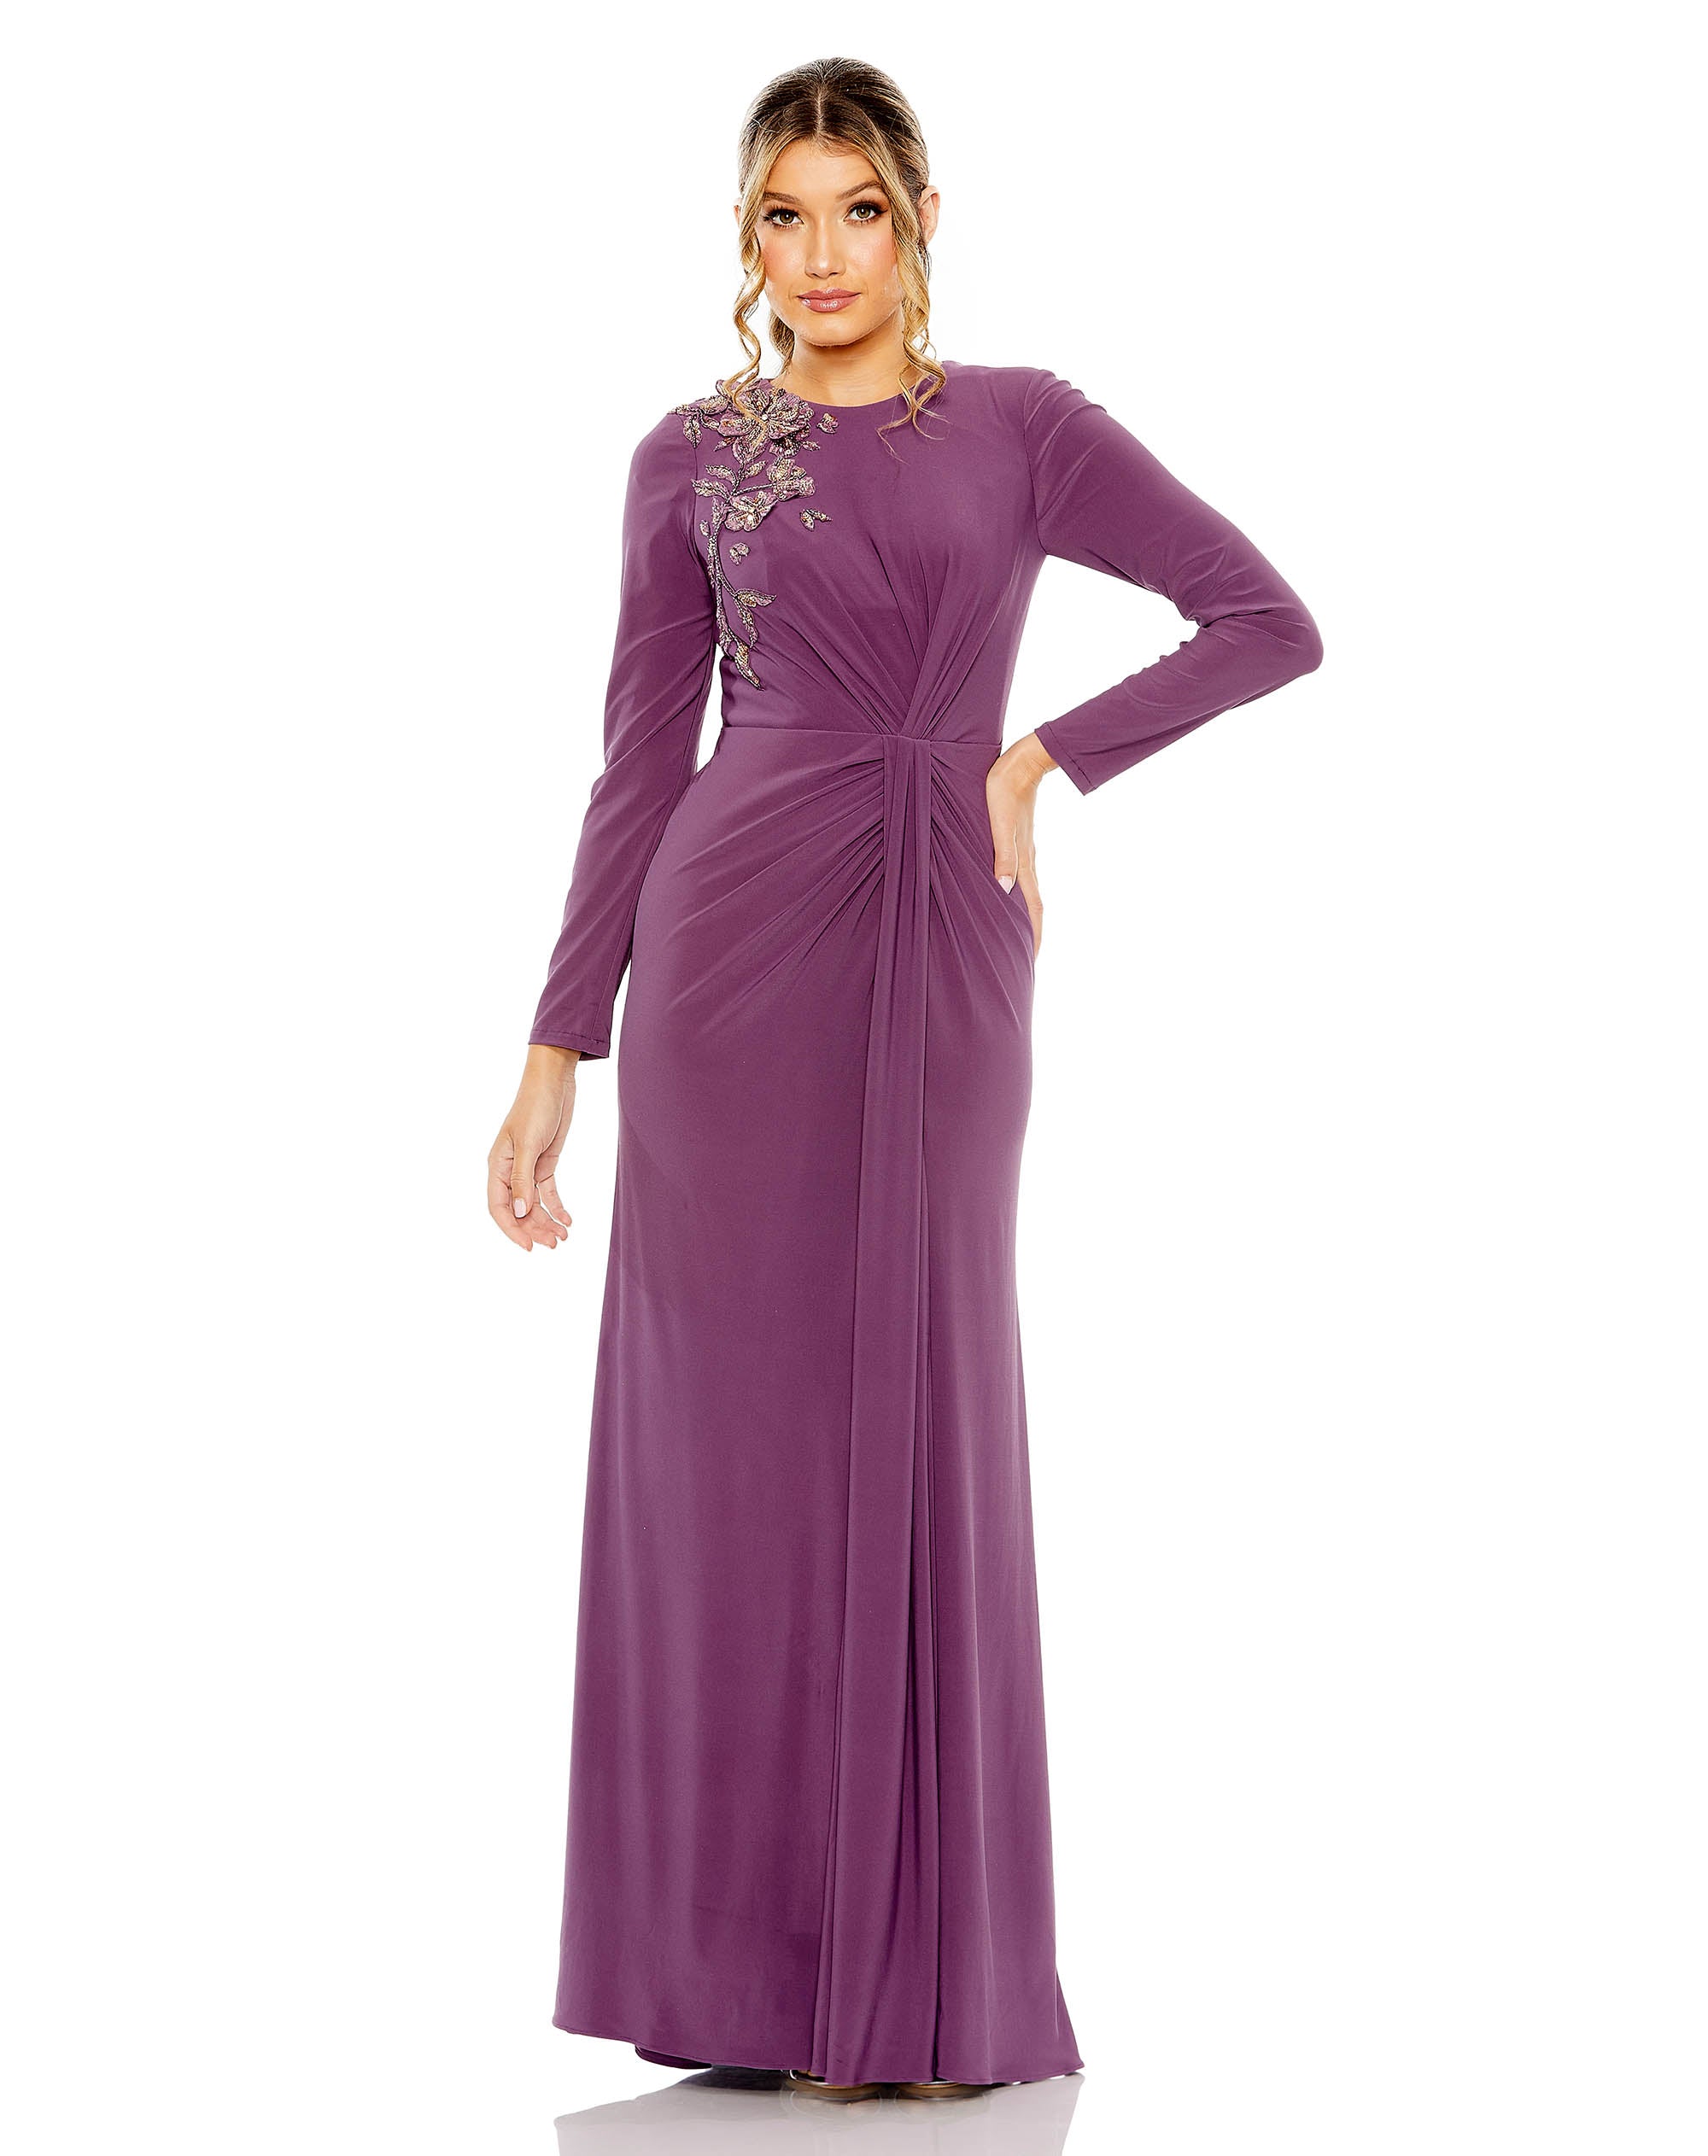 Jersey High Neck Long Sleeve Embellished Gown